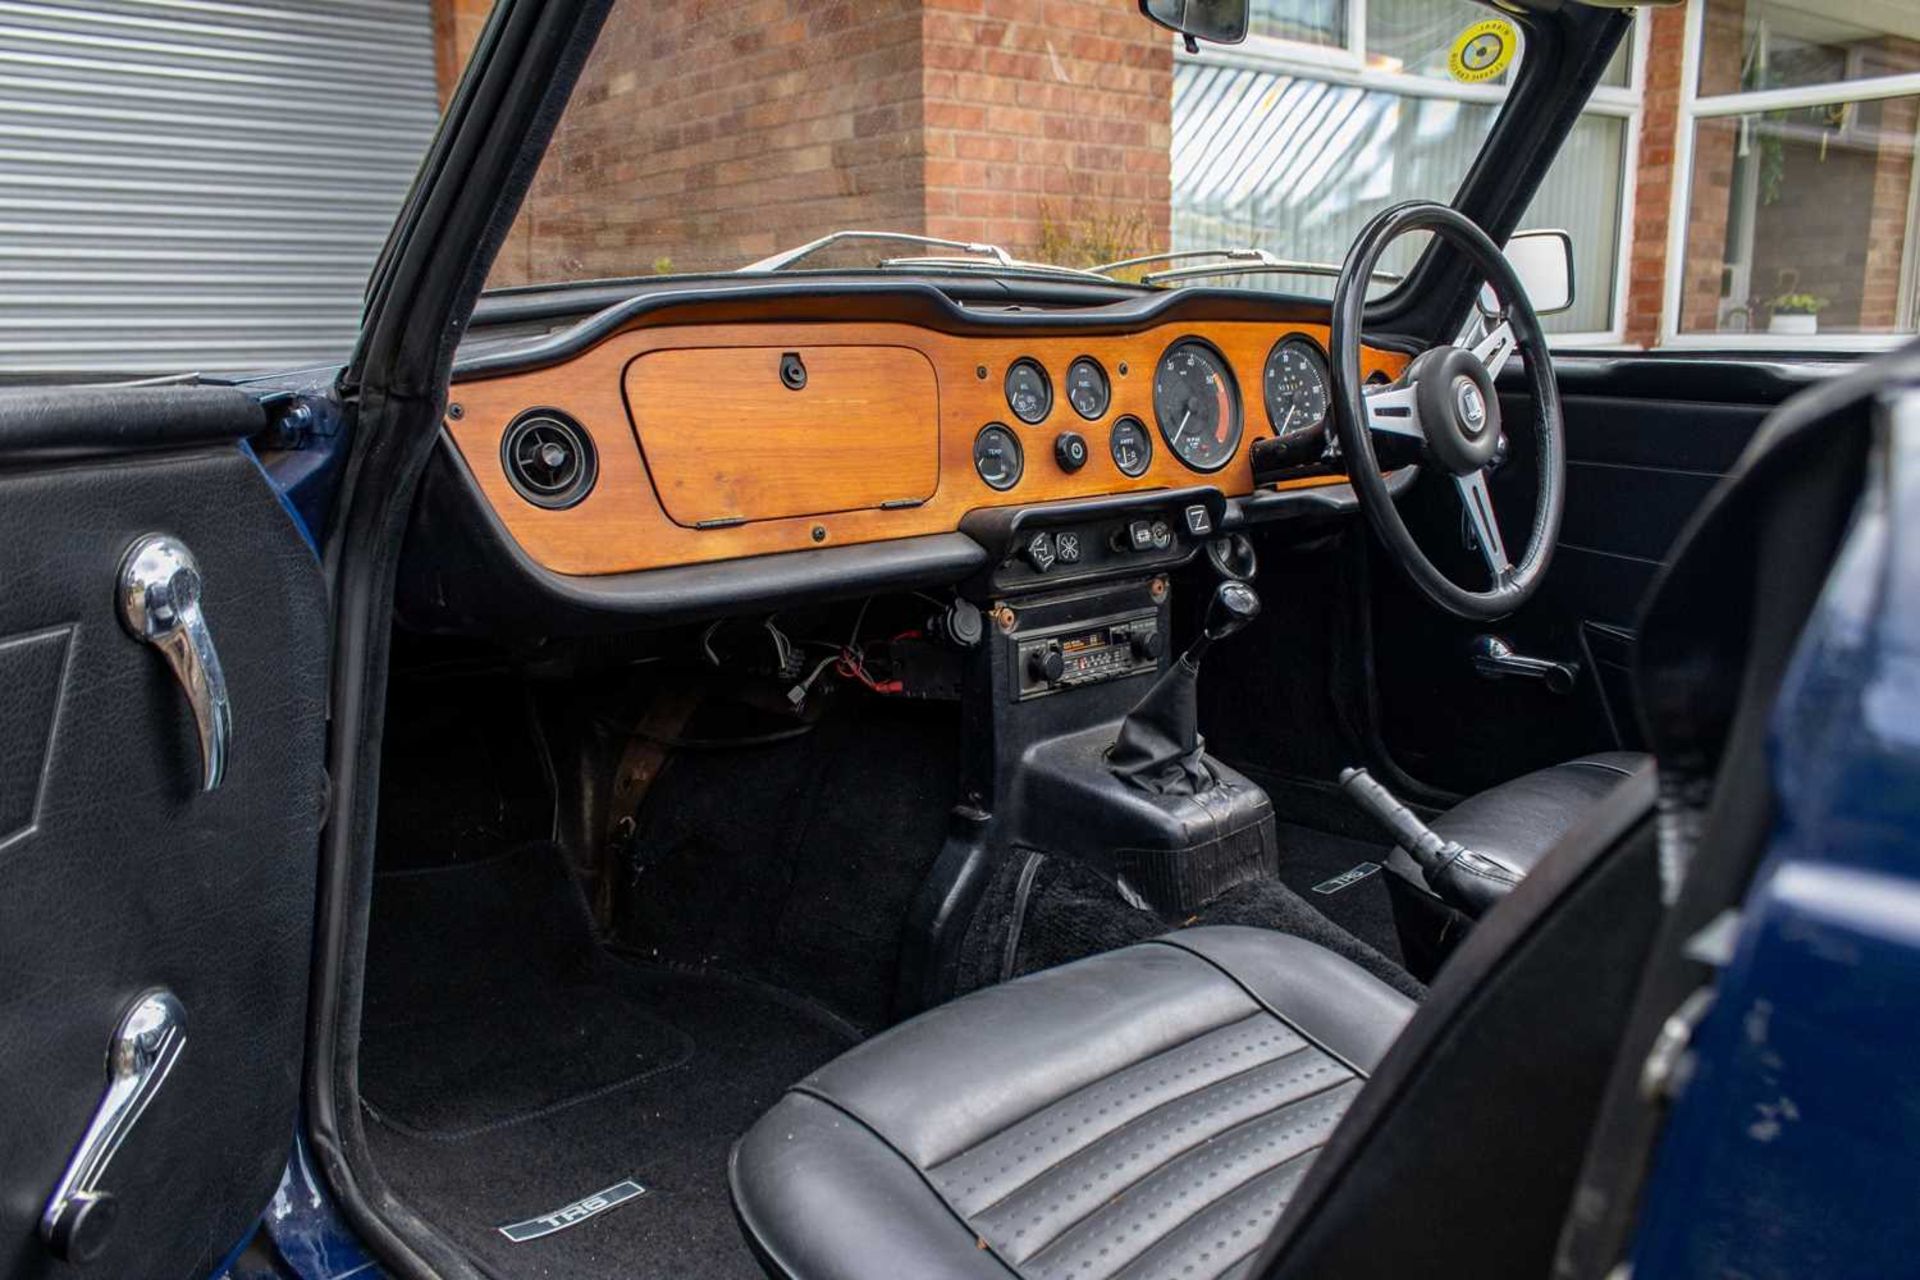 1972 Triumph TR6 Home market example, specified with manual overdrive transmission - Image 66 of 95